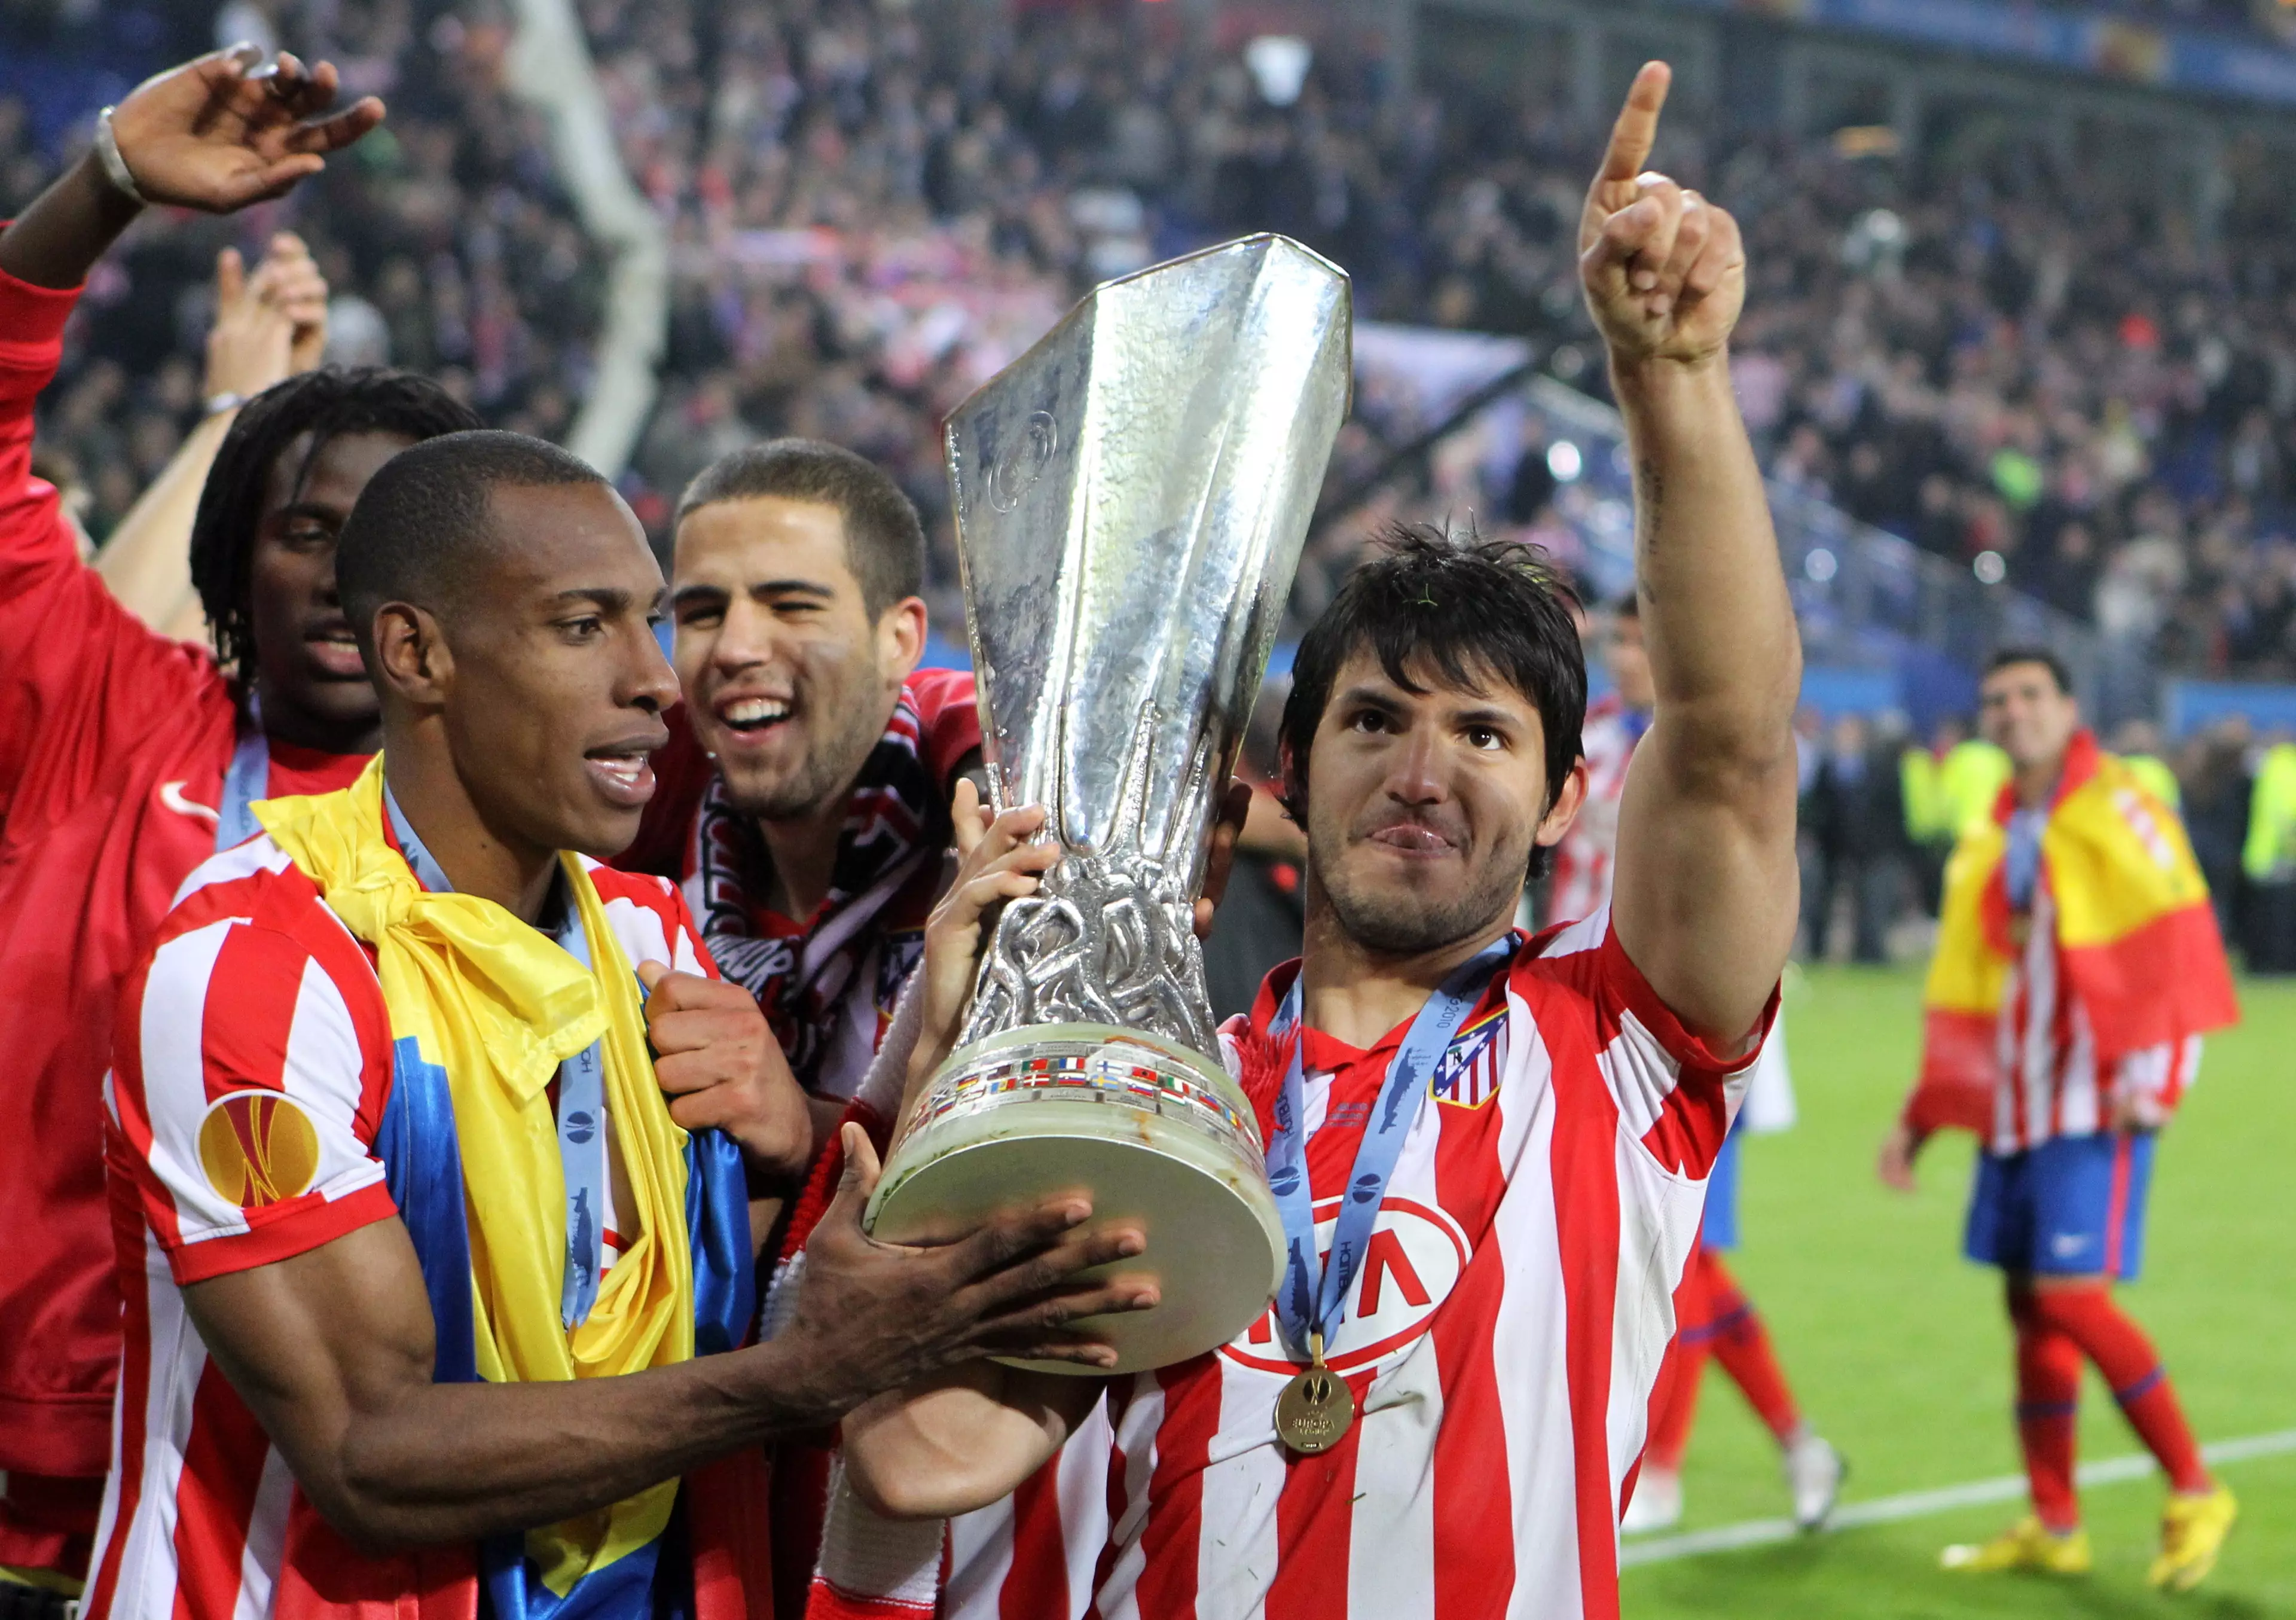 Aguero won the Europa League with Atletico Madrid. Image: PA Images